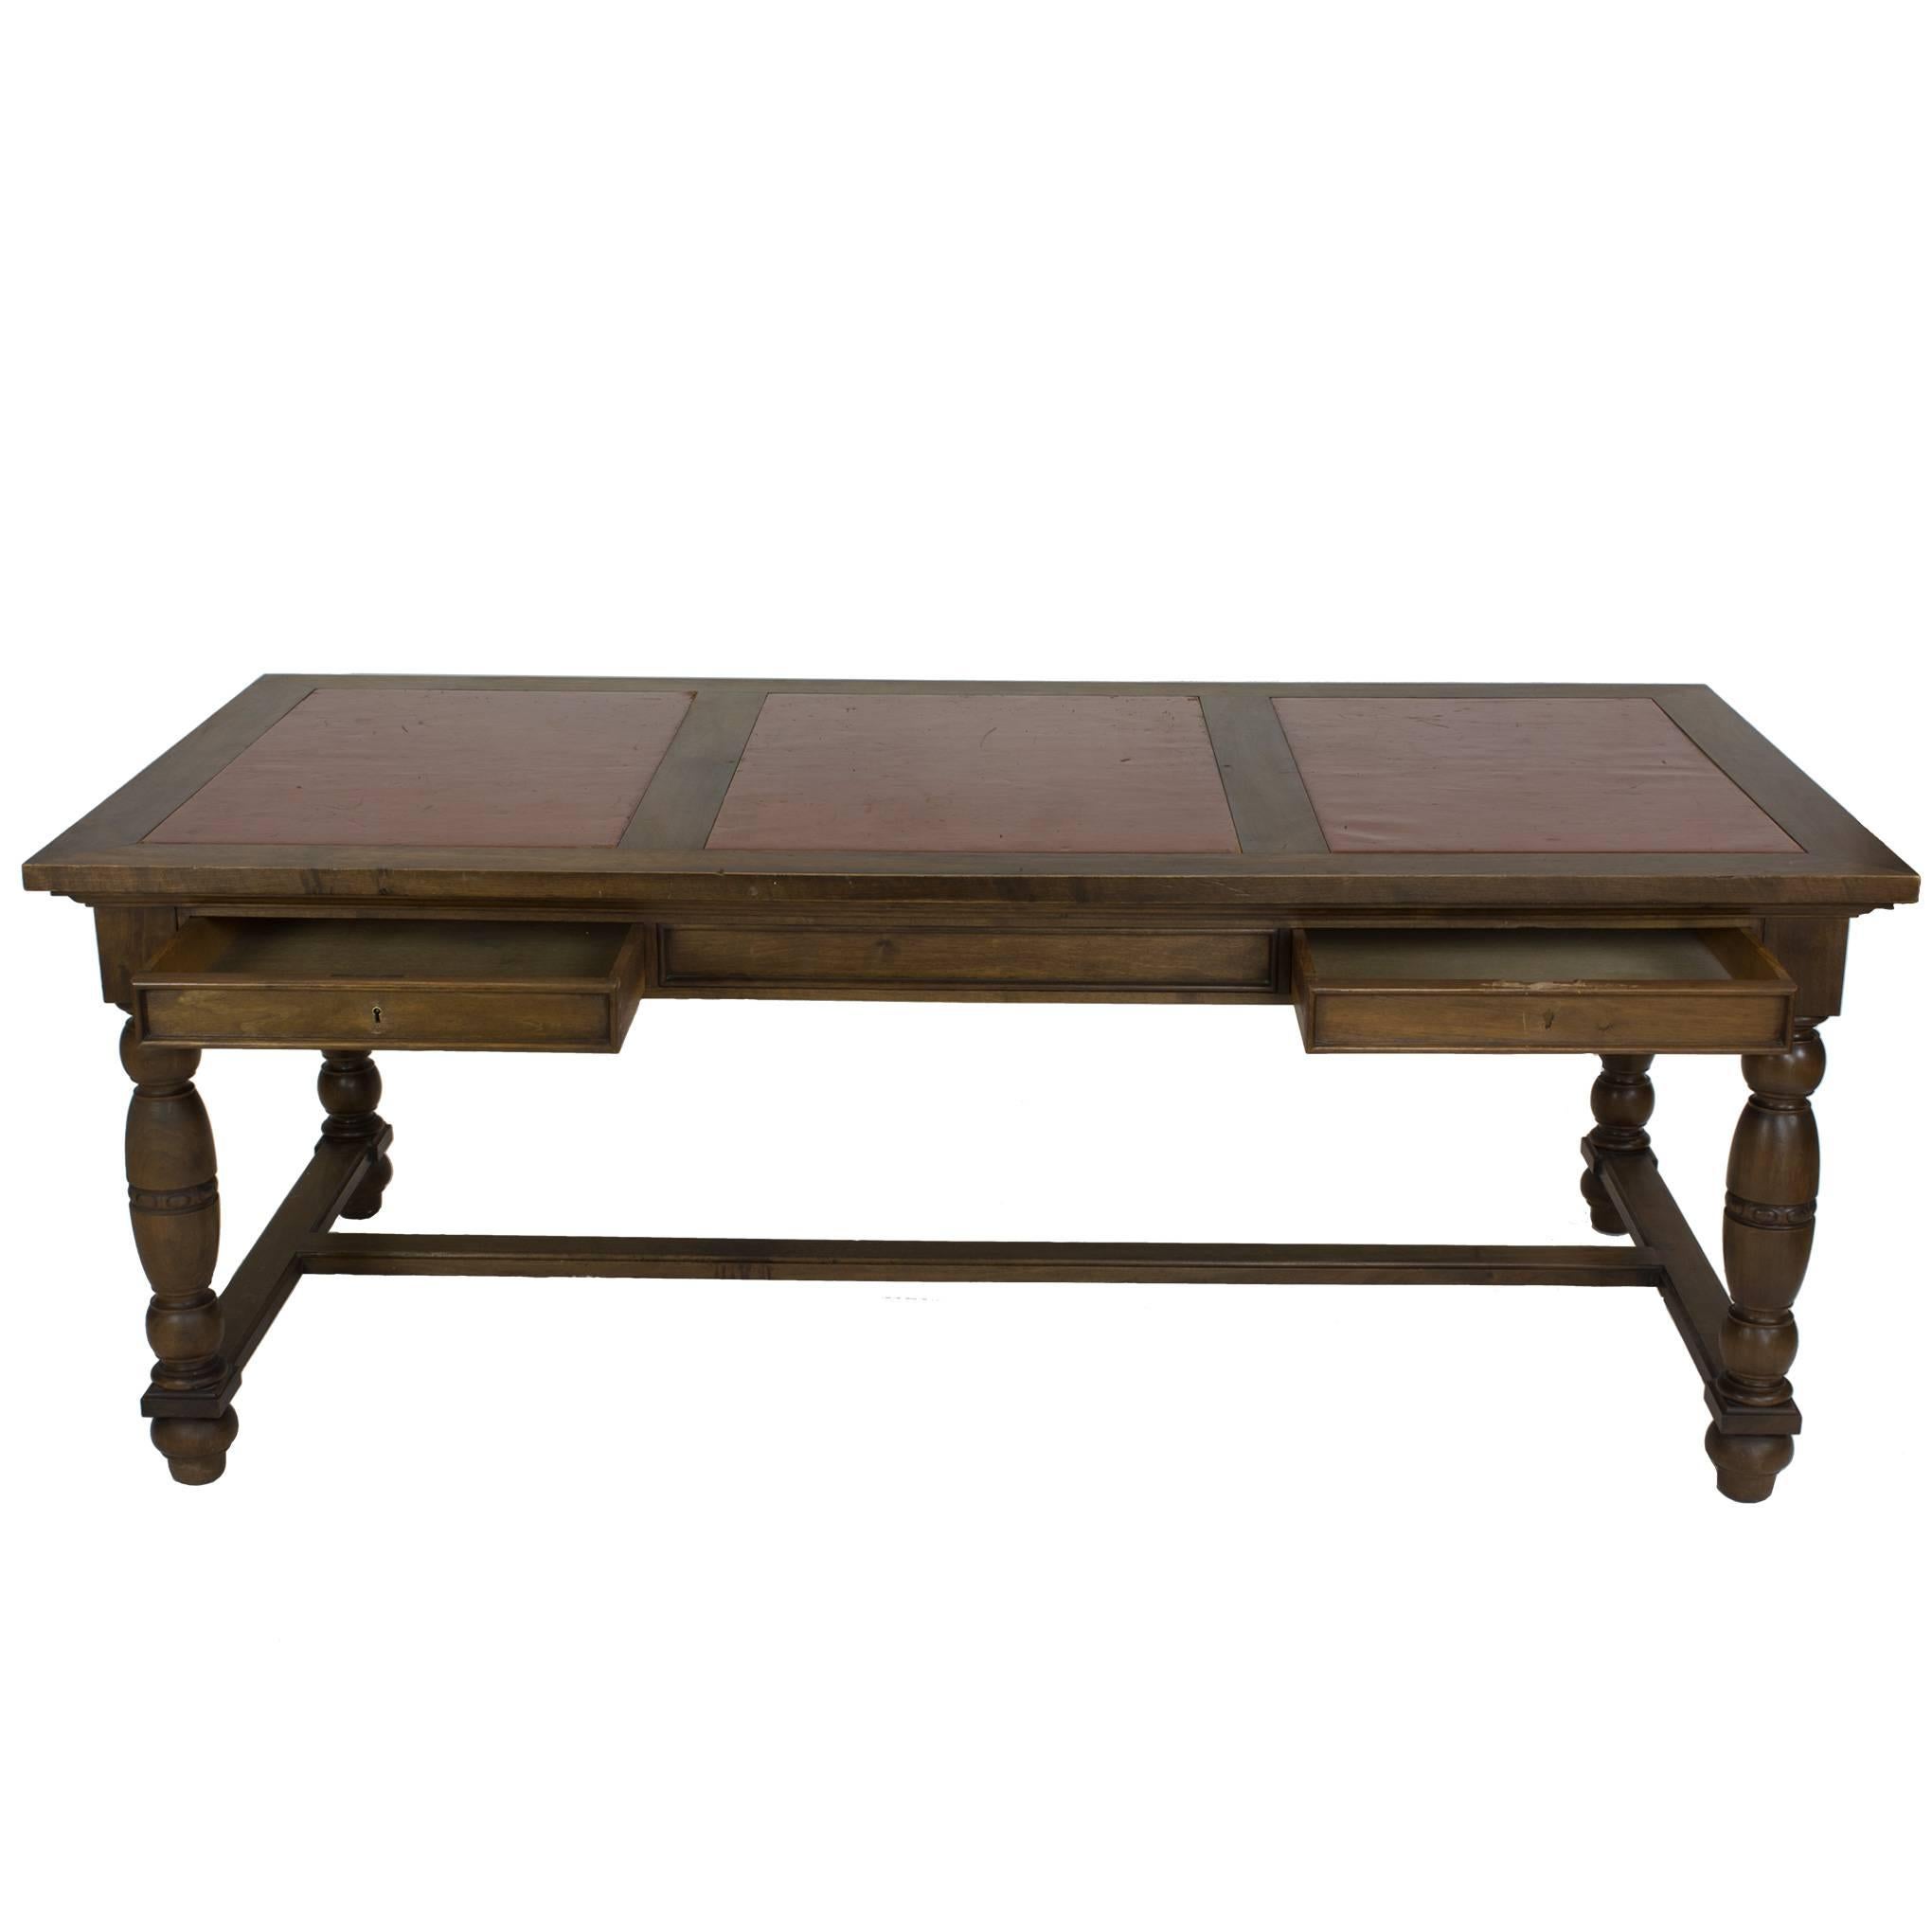 Elegant in its simplicity, this sturdy old table from circa 1870 would make a wonderful anchor piece for an open wall. In excellent shape for its age, it has smooth turned legs with lovely tooled details that set it apart from strictly utilitarian